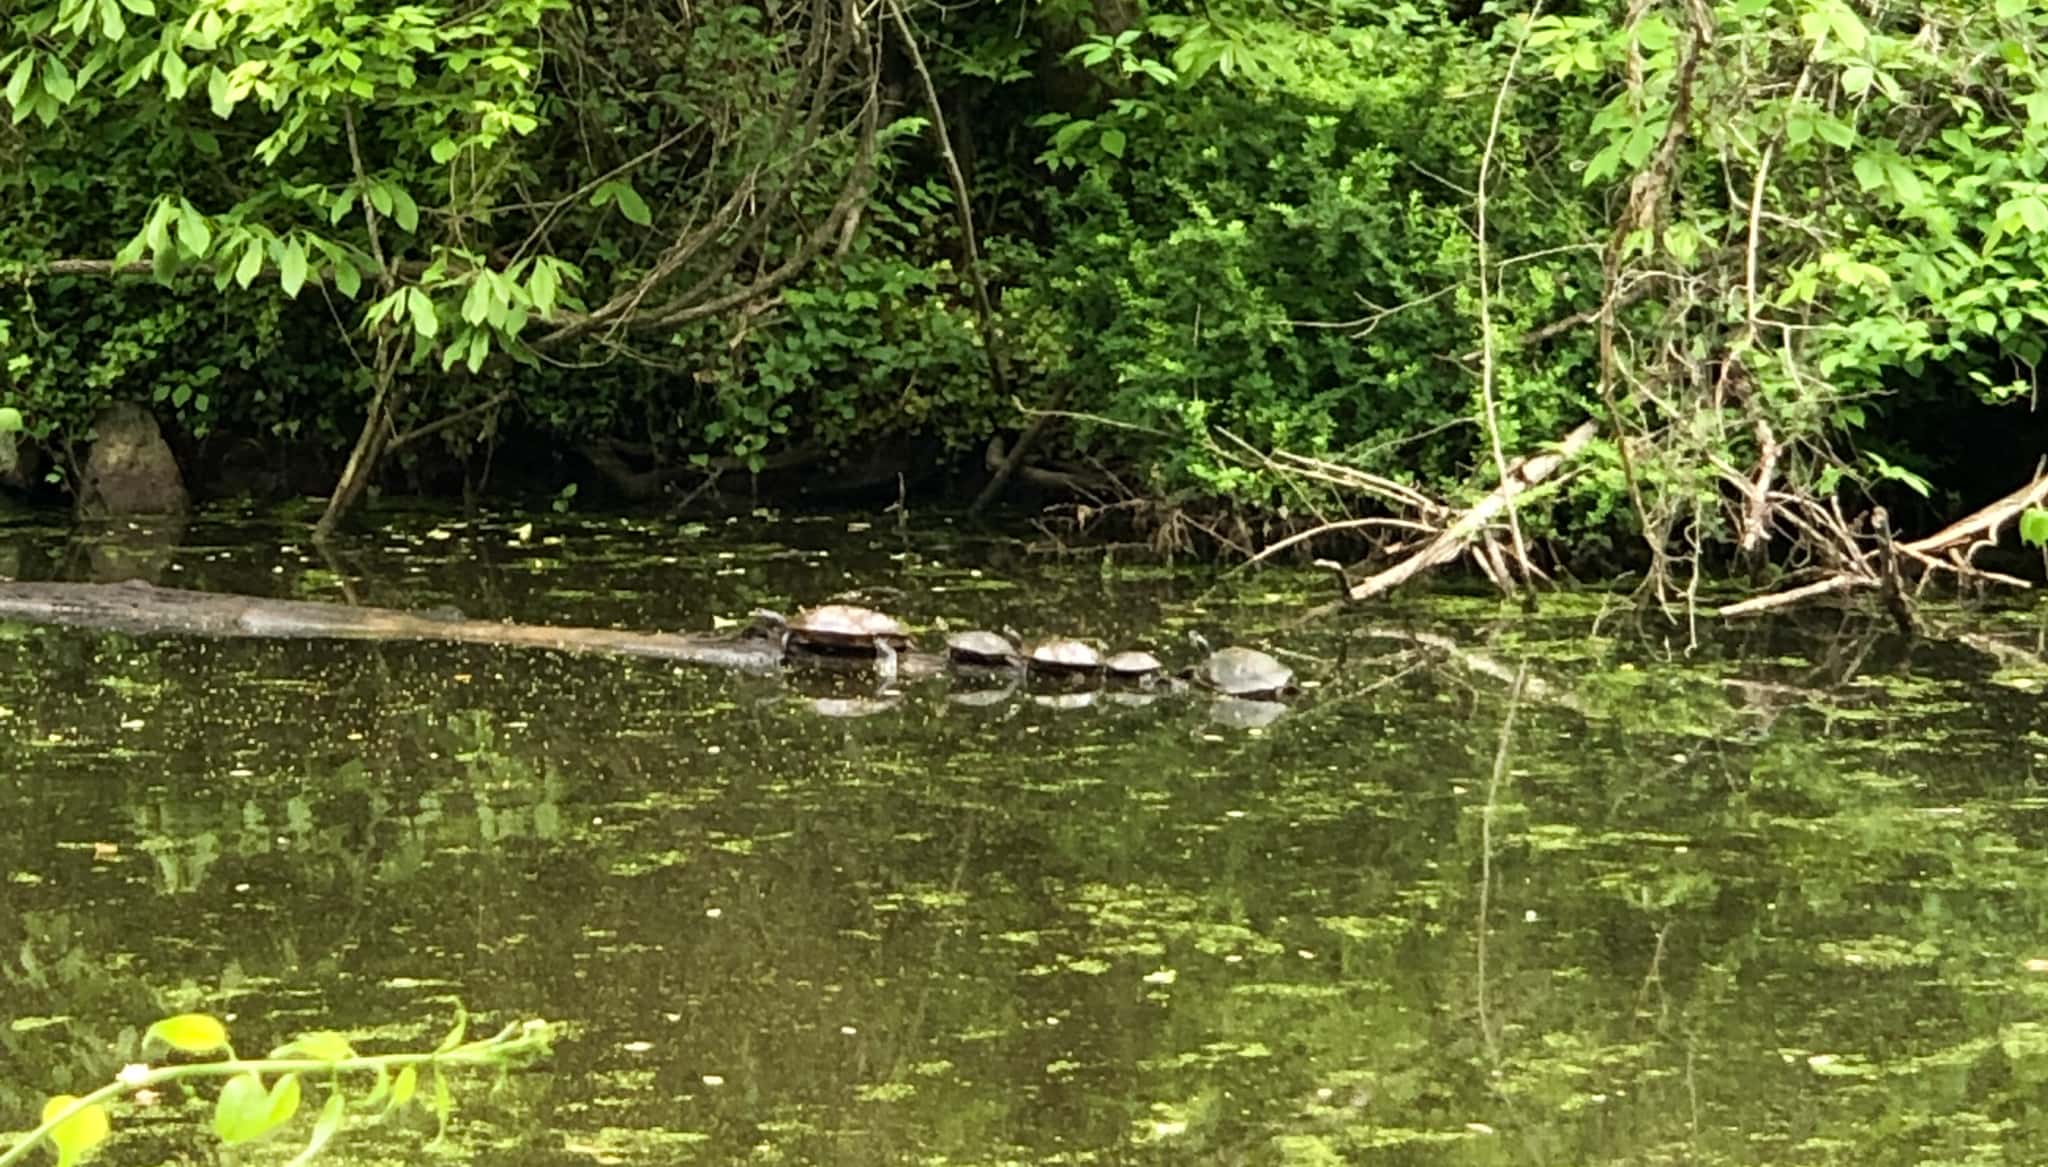 family of turtles lined up on a log.